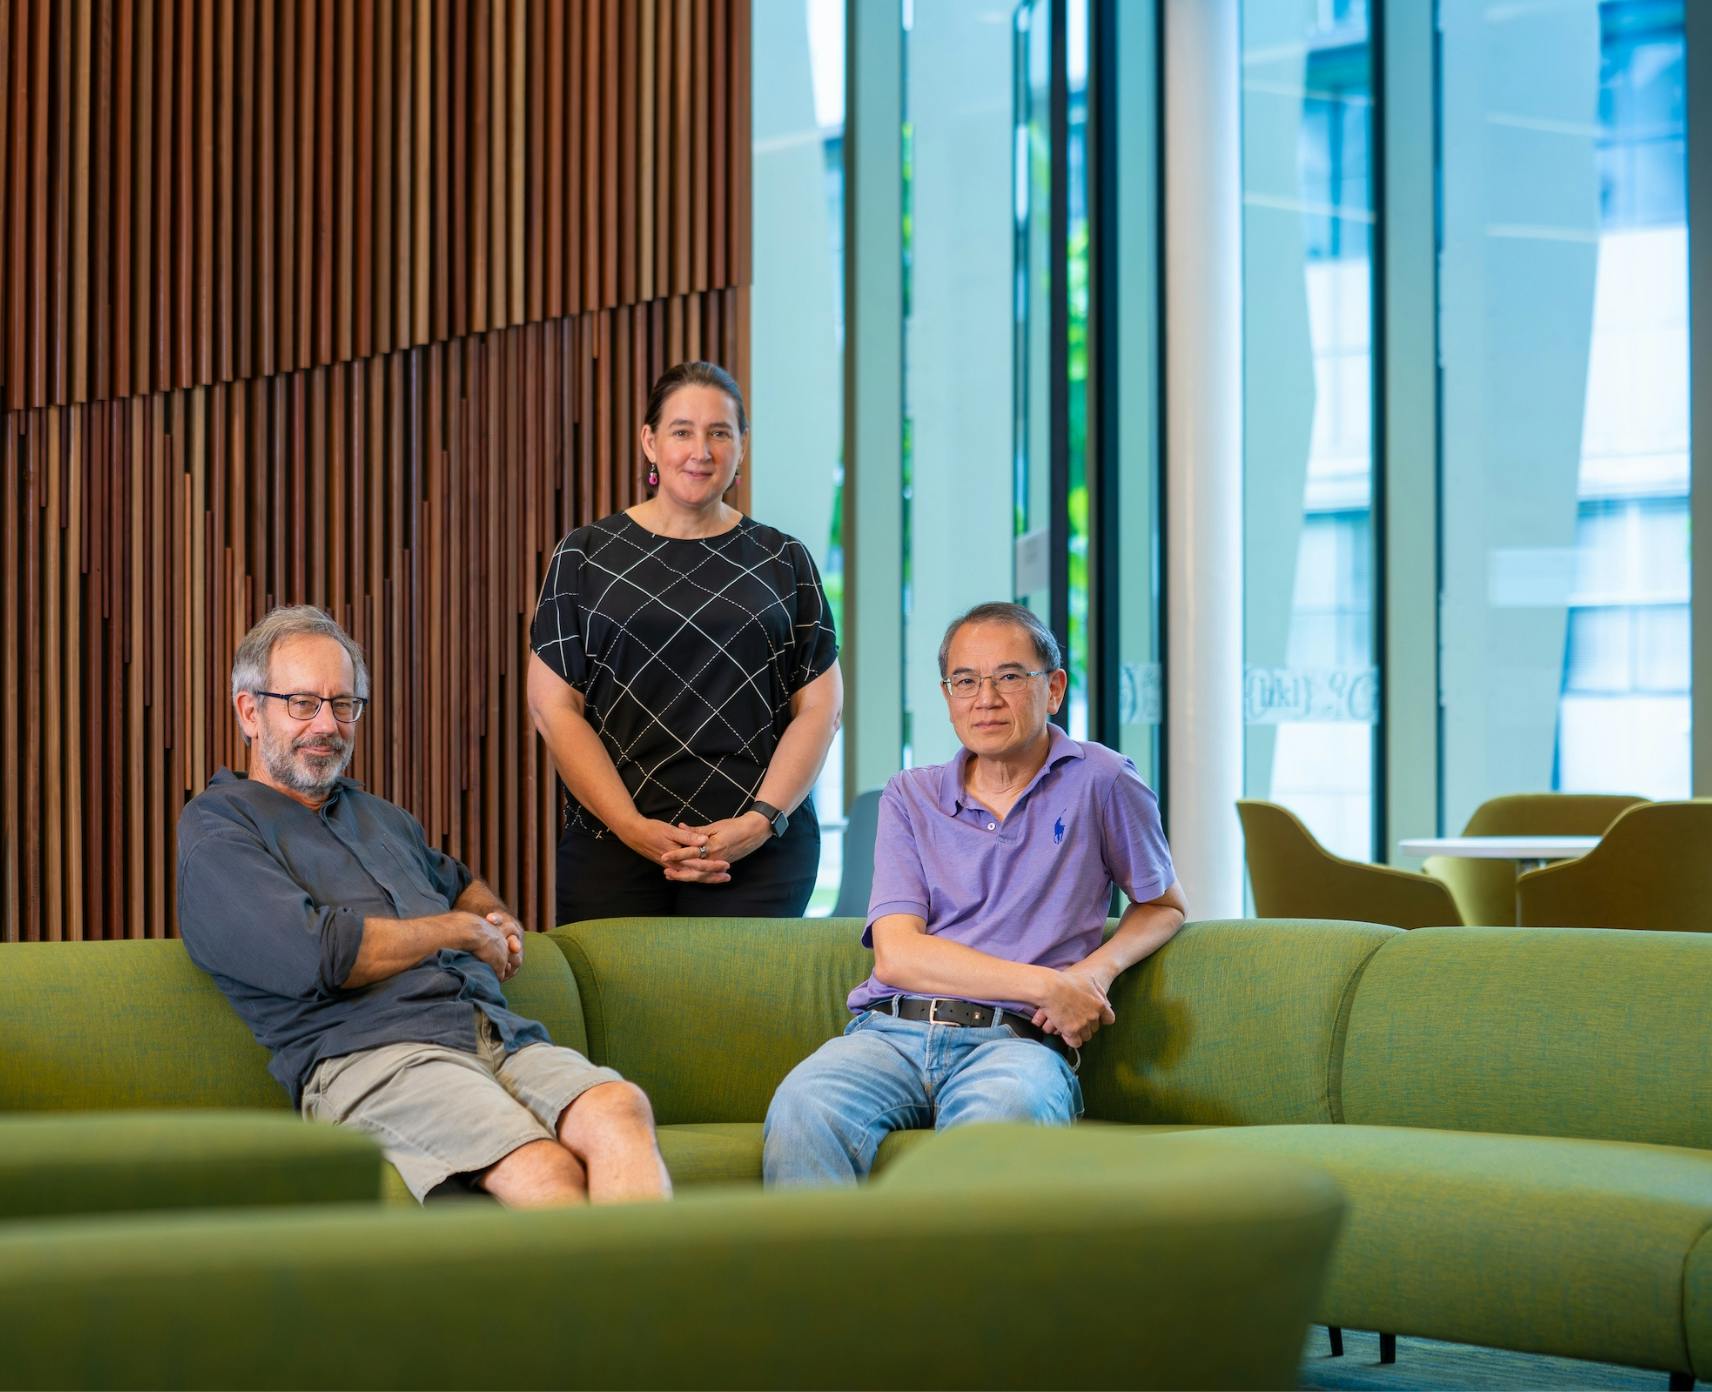 Three physicists sit on on a green couch.